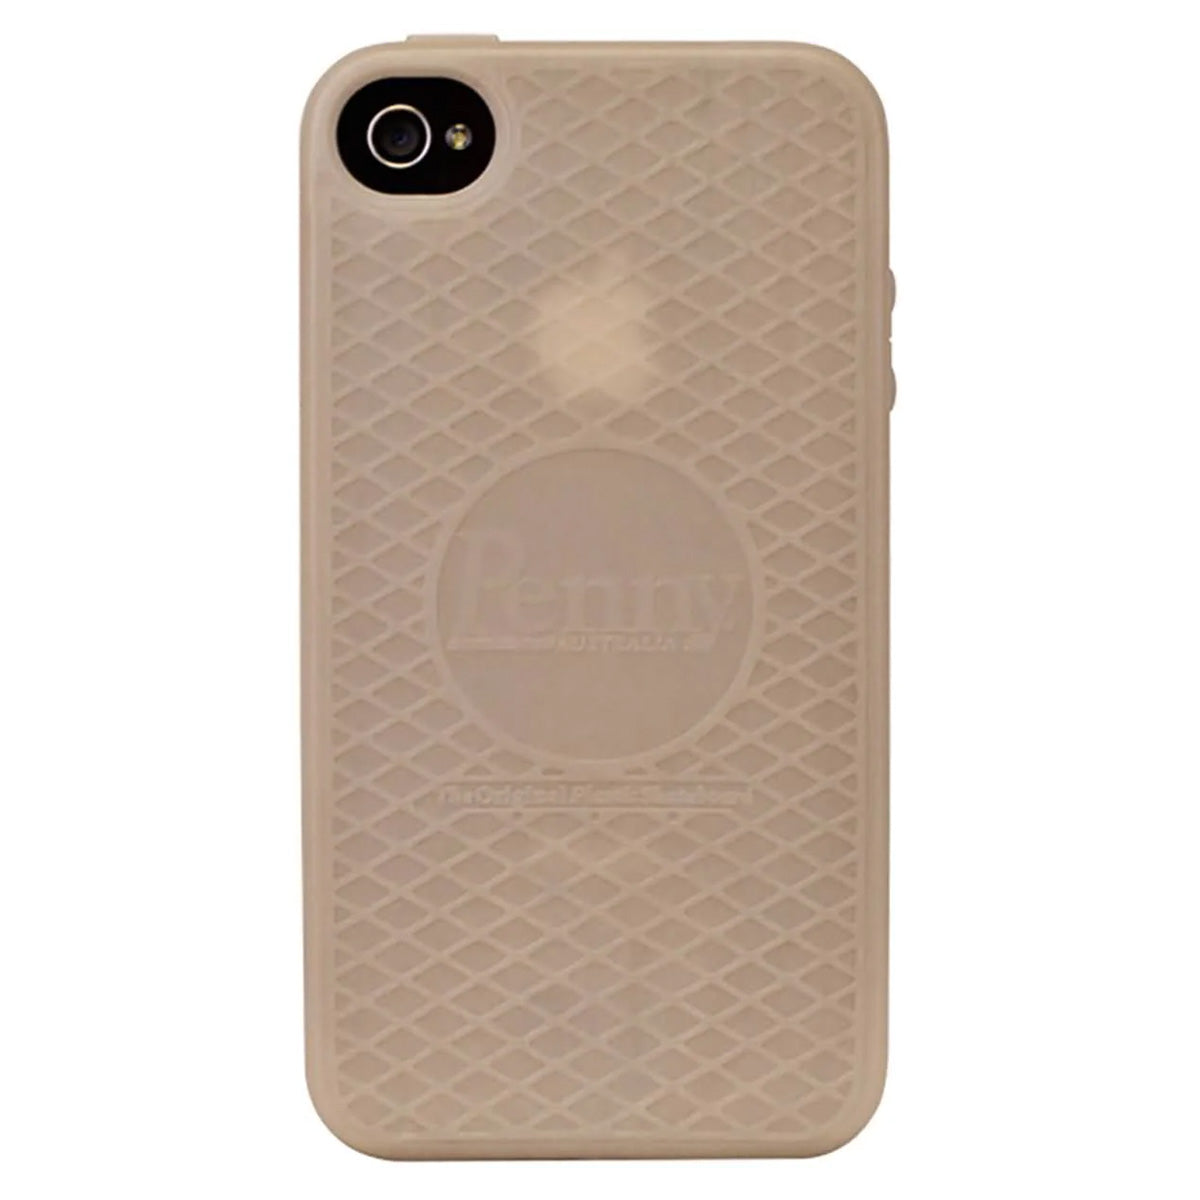 Penny Iphone 4/4s Case Phone Accessories